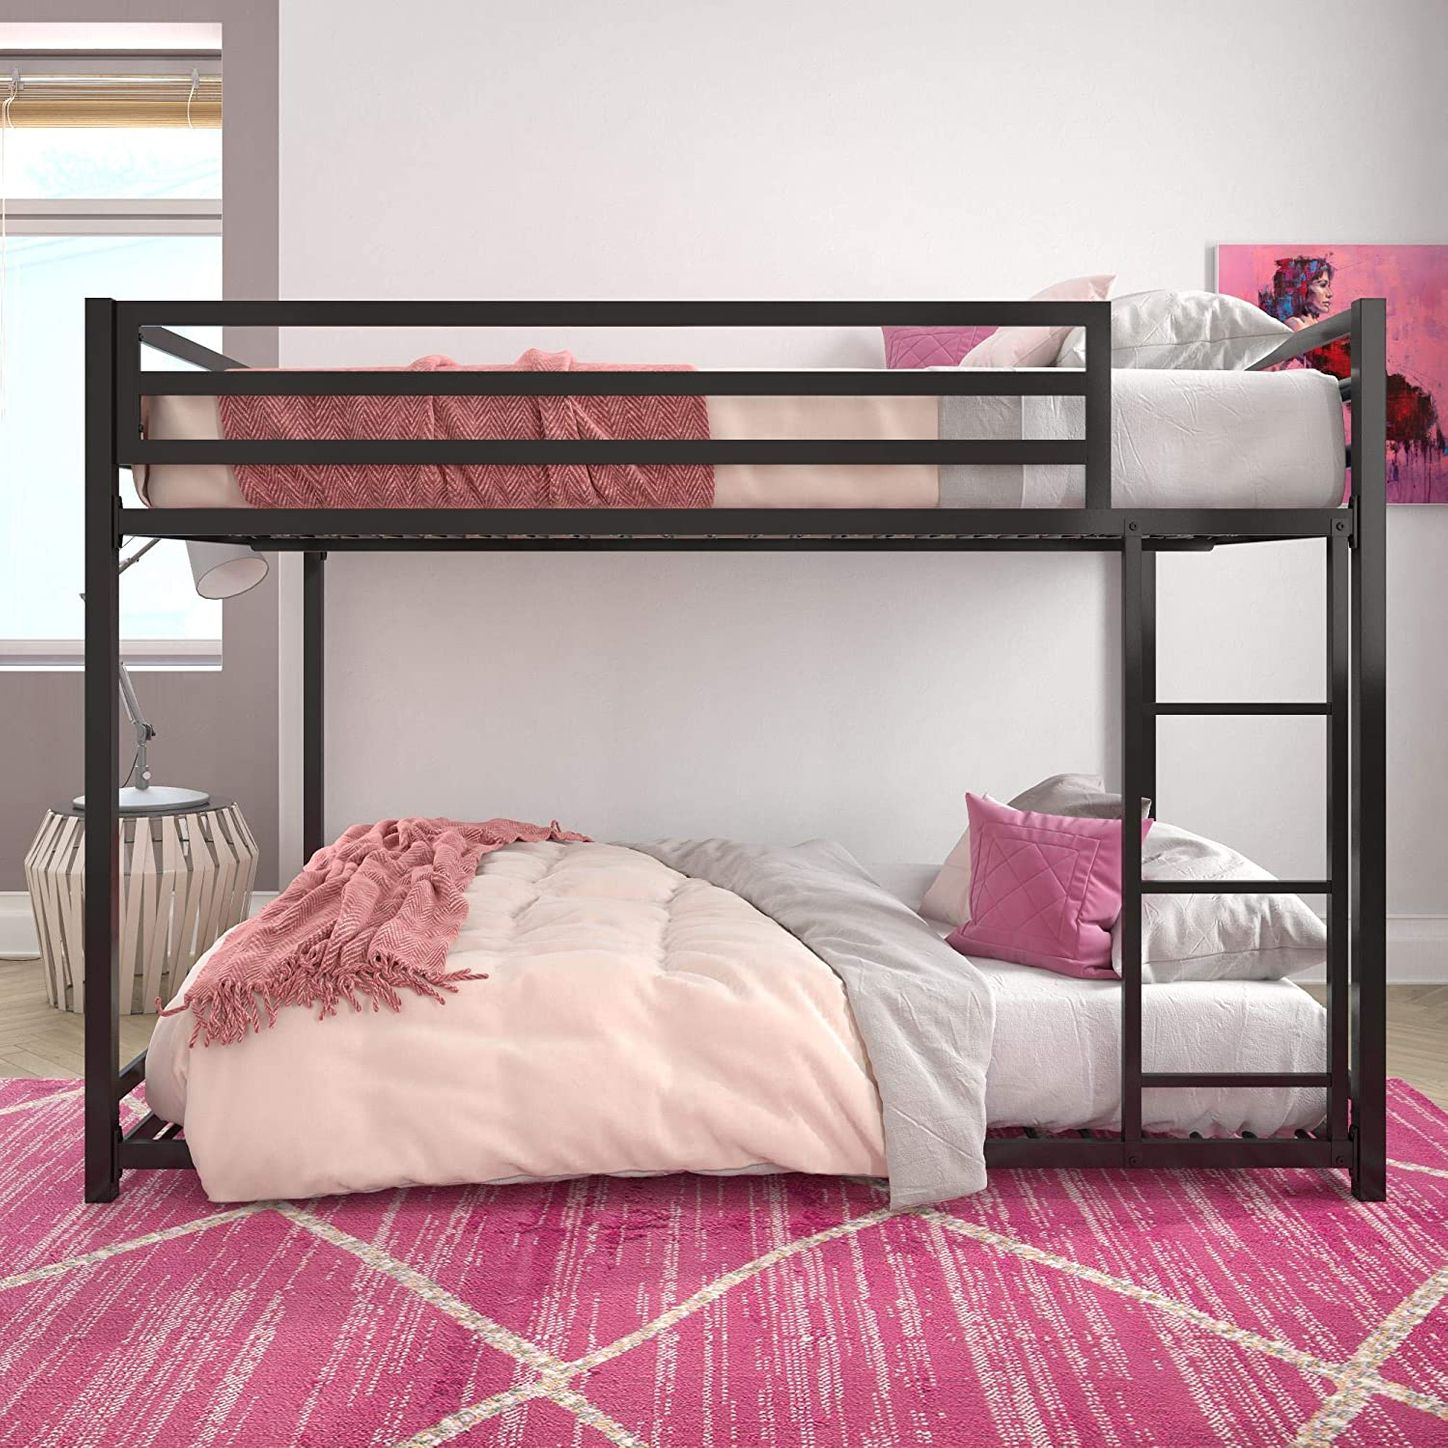 8 Best Bunk Beds 2020 The Strategist, Bunk Beds For Less Than 100